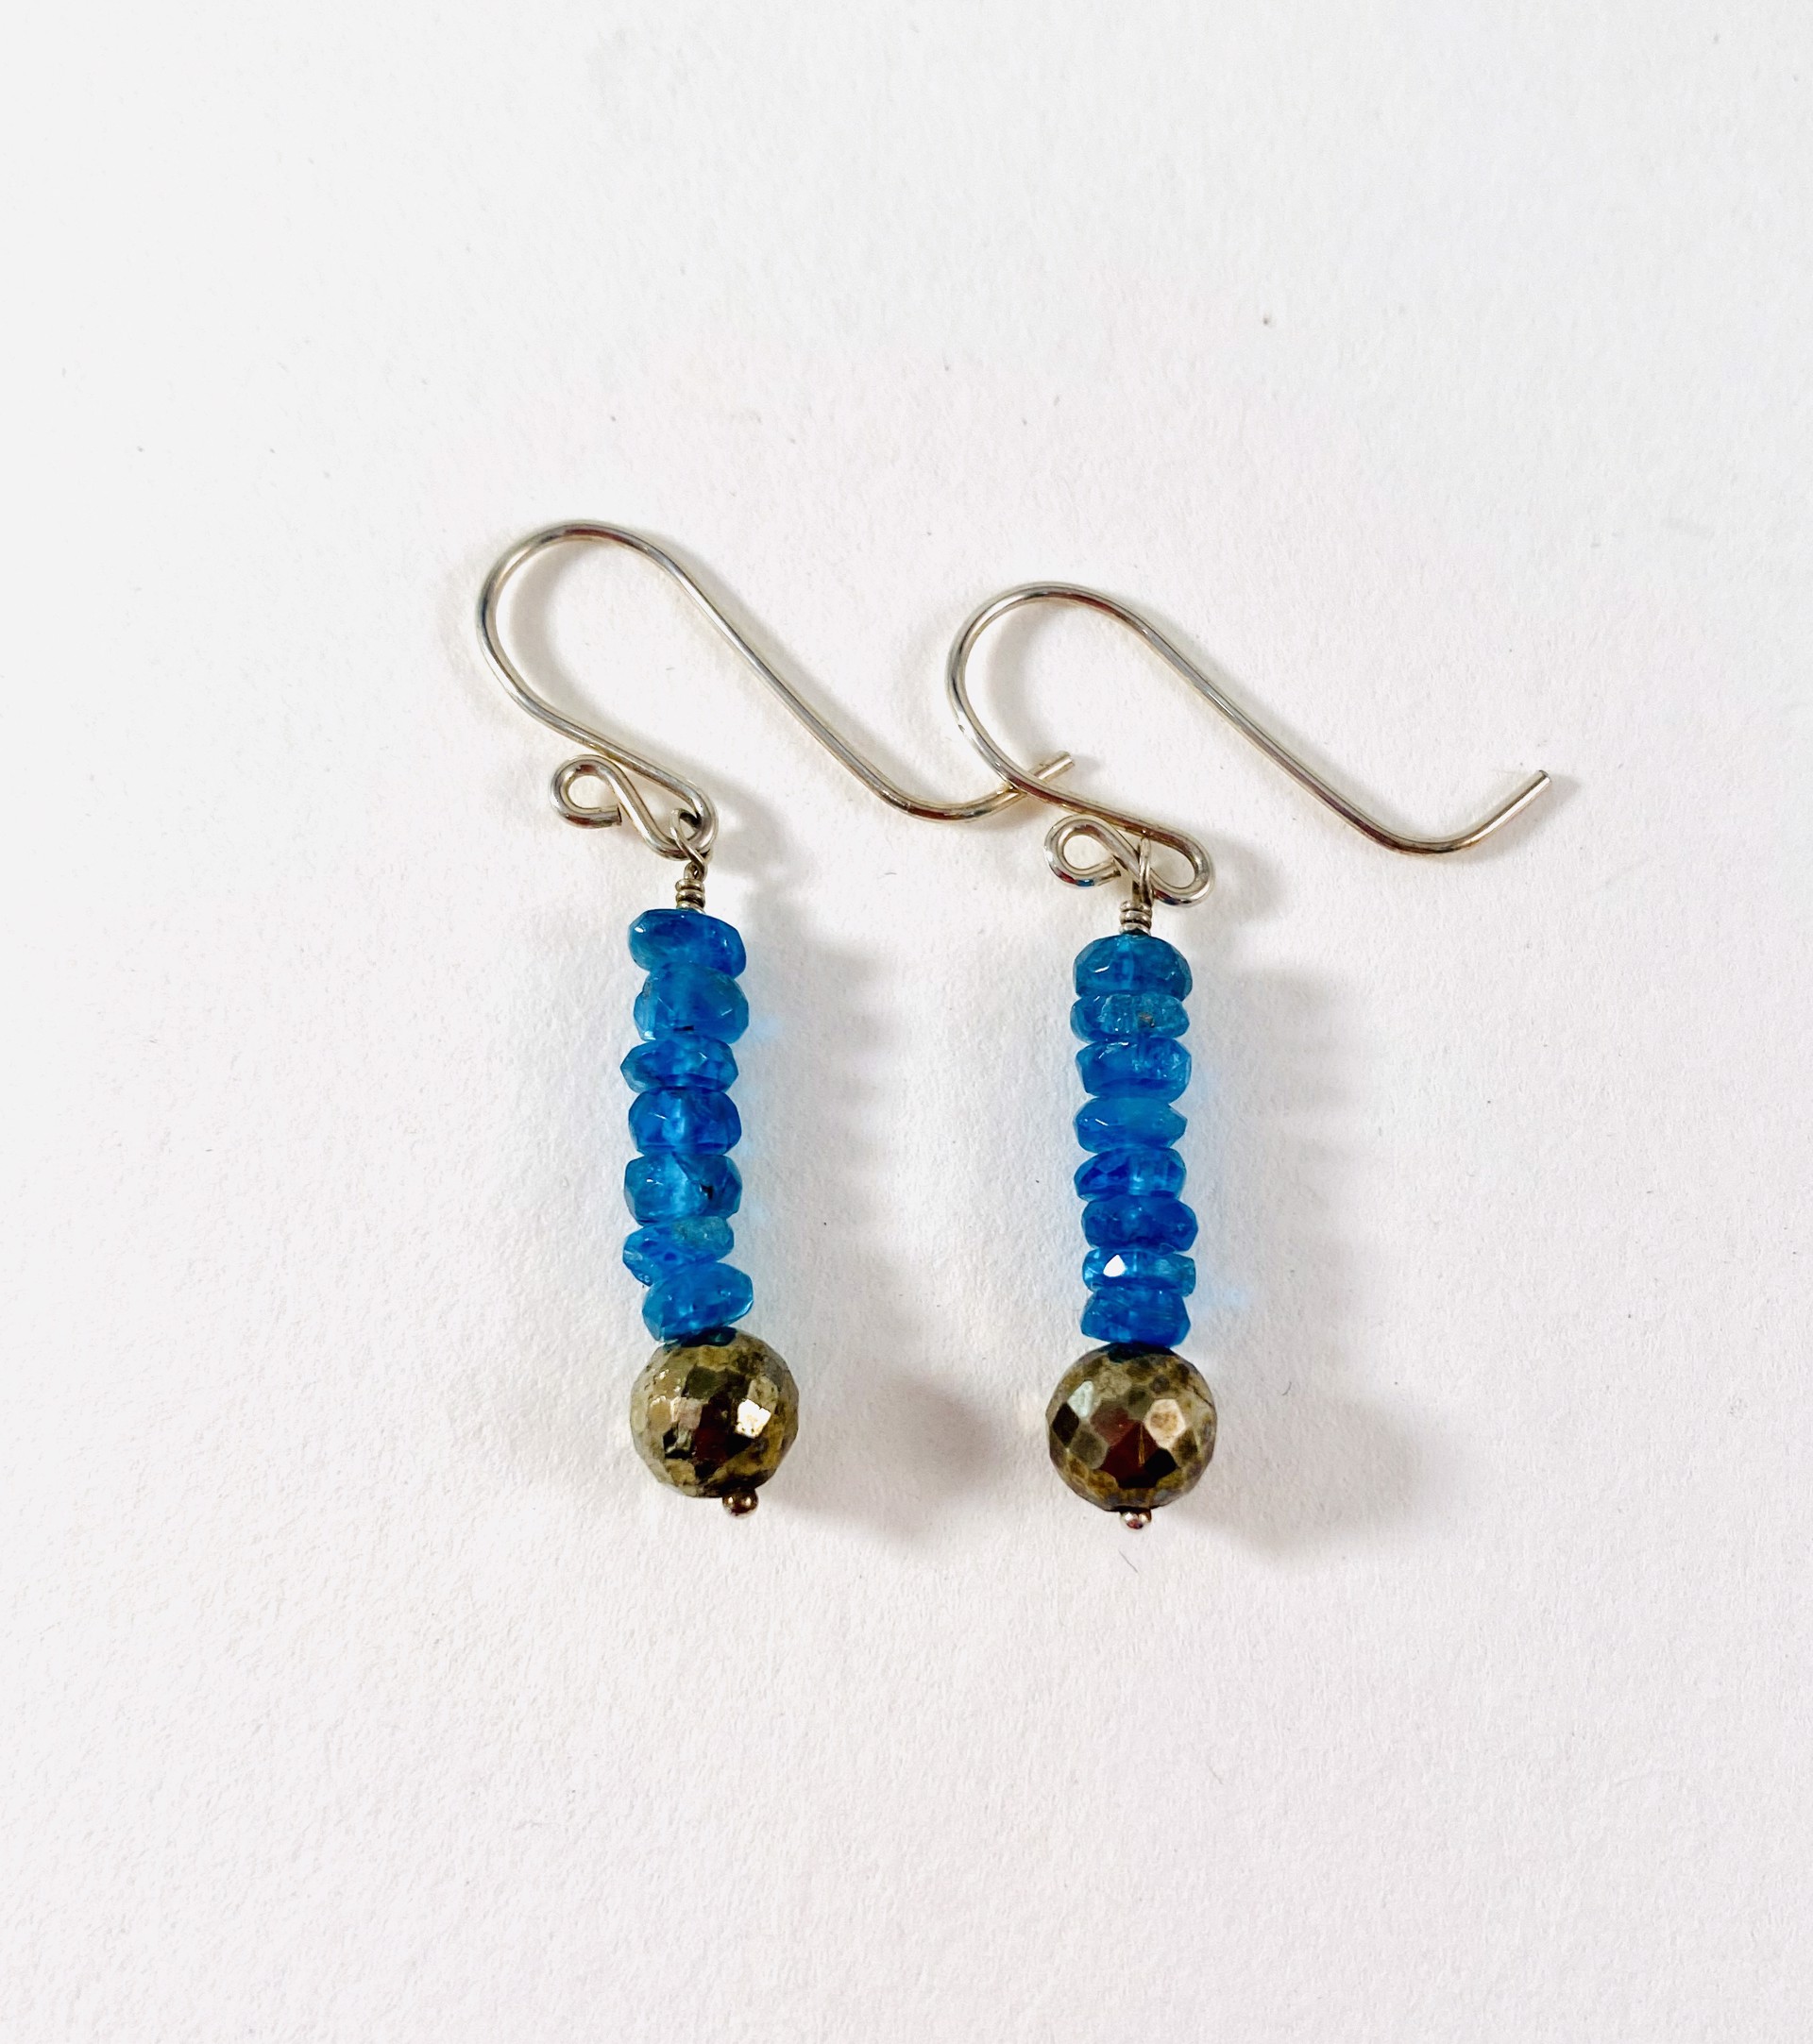 SL20-25 Apatite and Pyrite Earrings by Shelby Lee - jewelry